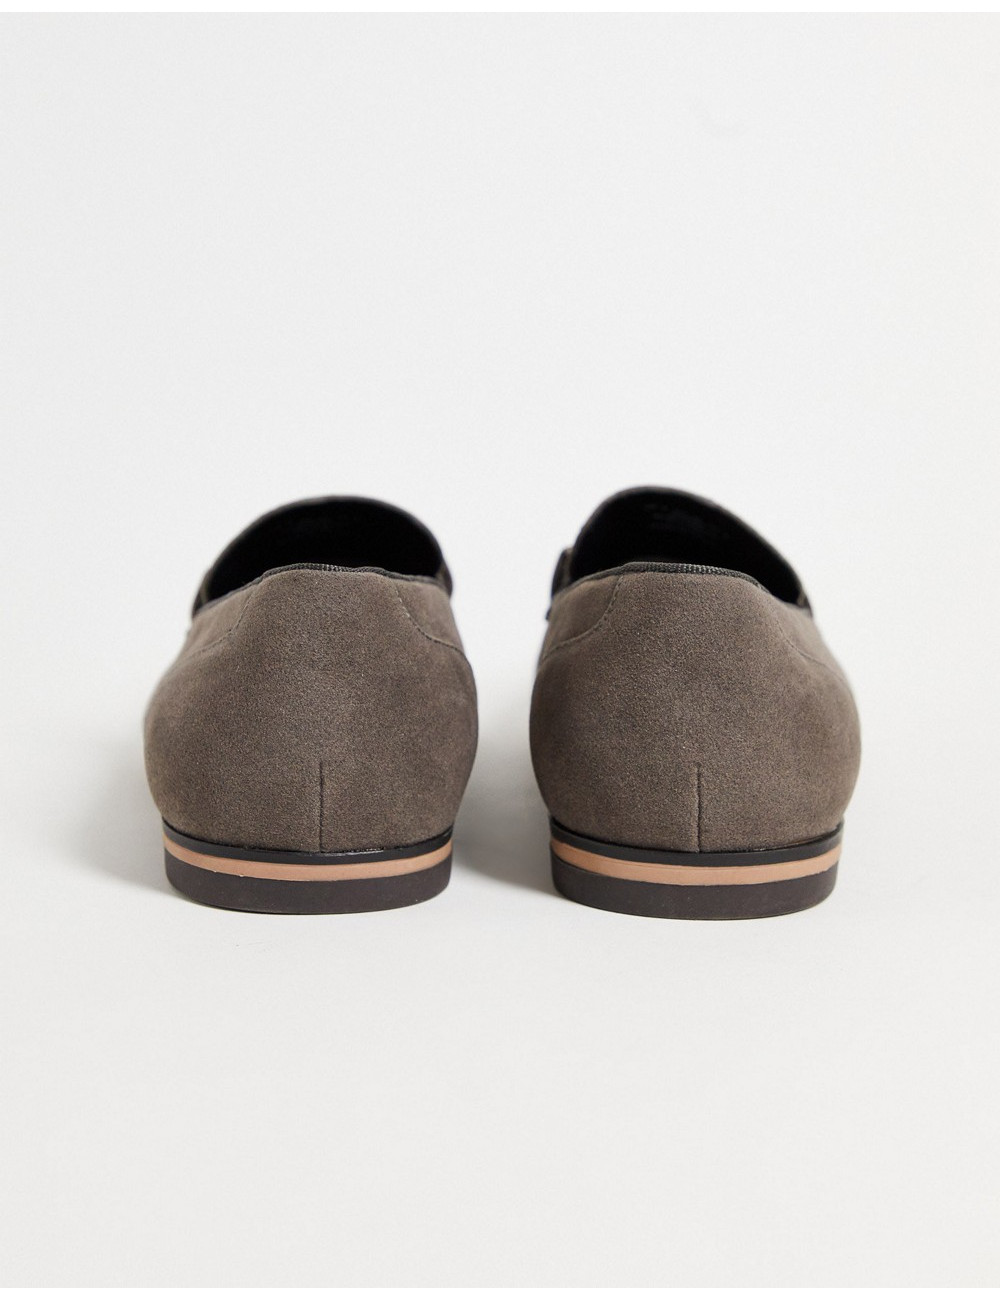 ASOS DESIGN loafers in grey...